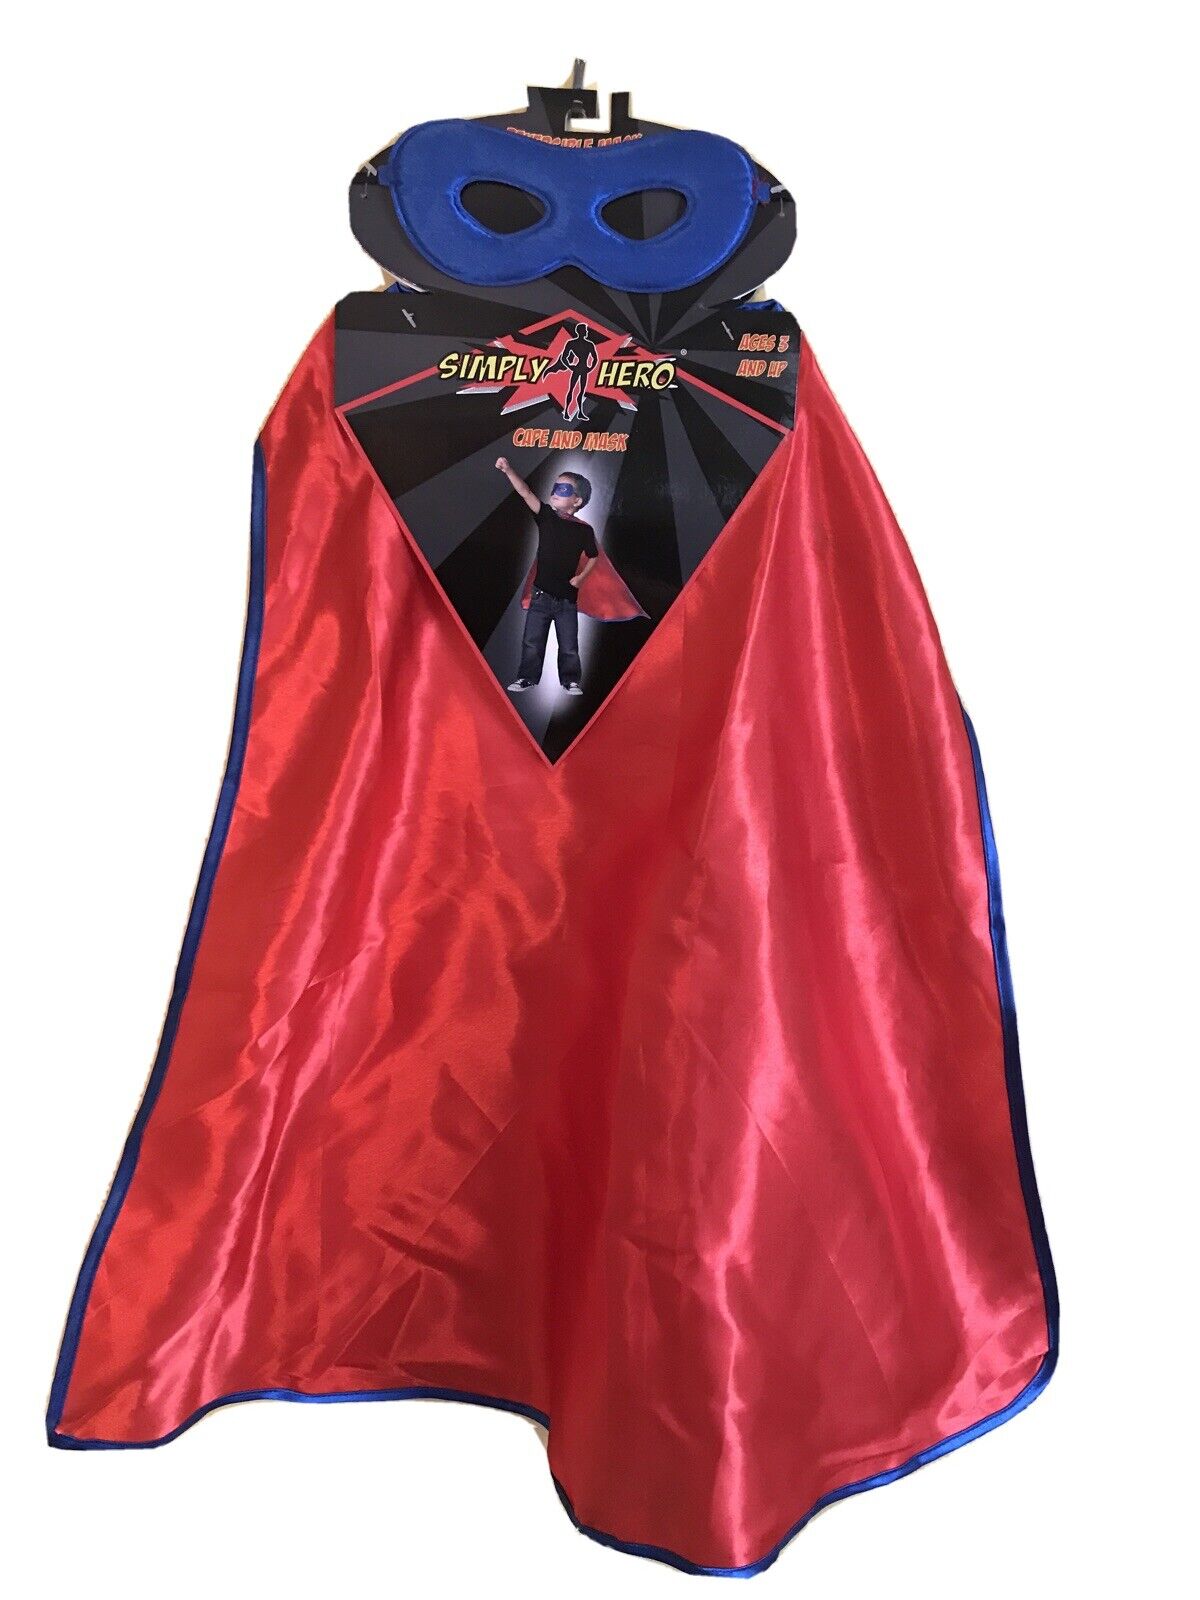 Child's Simply Hero Super Hero Cape and Reversible Mask Set NWT